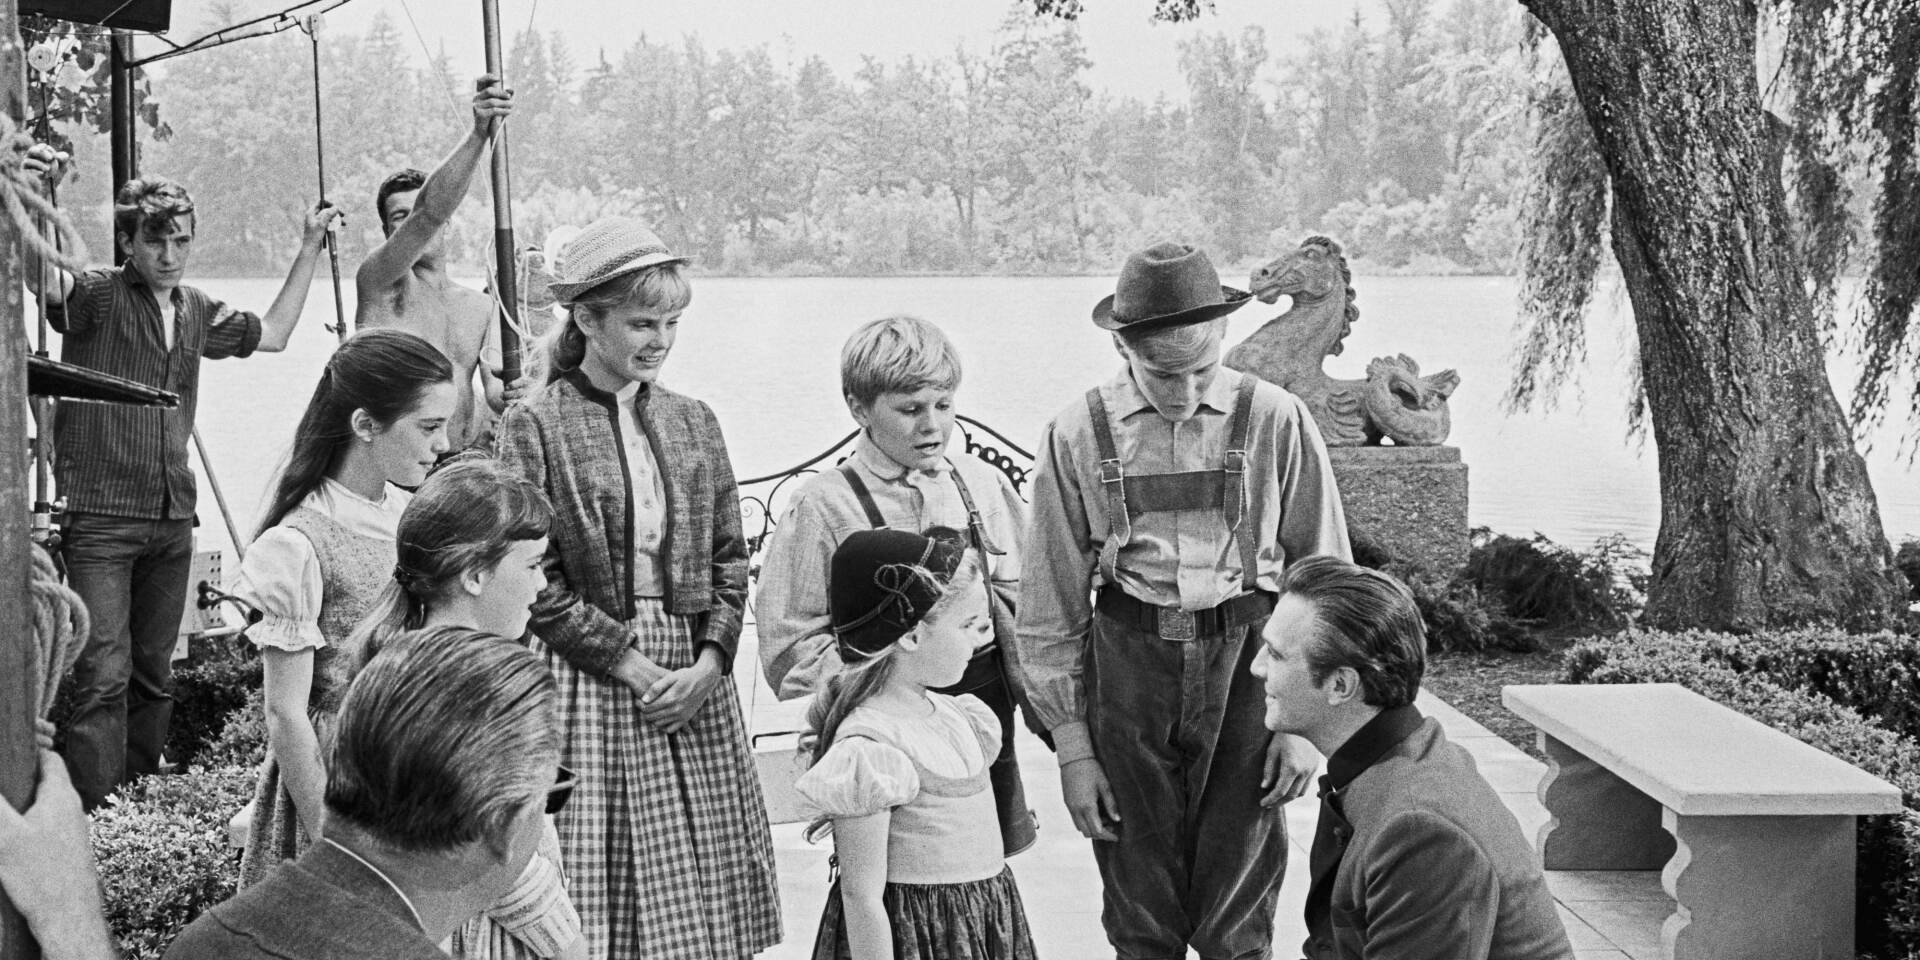 Shooting - Baron von Trapp and children © akg images / Erich Lessing